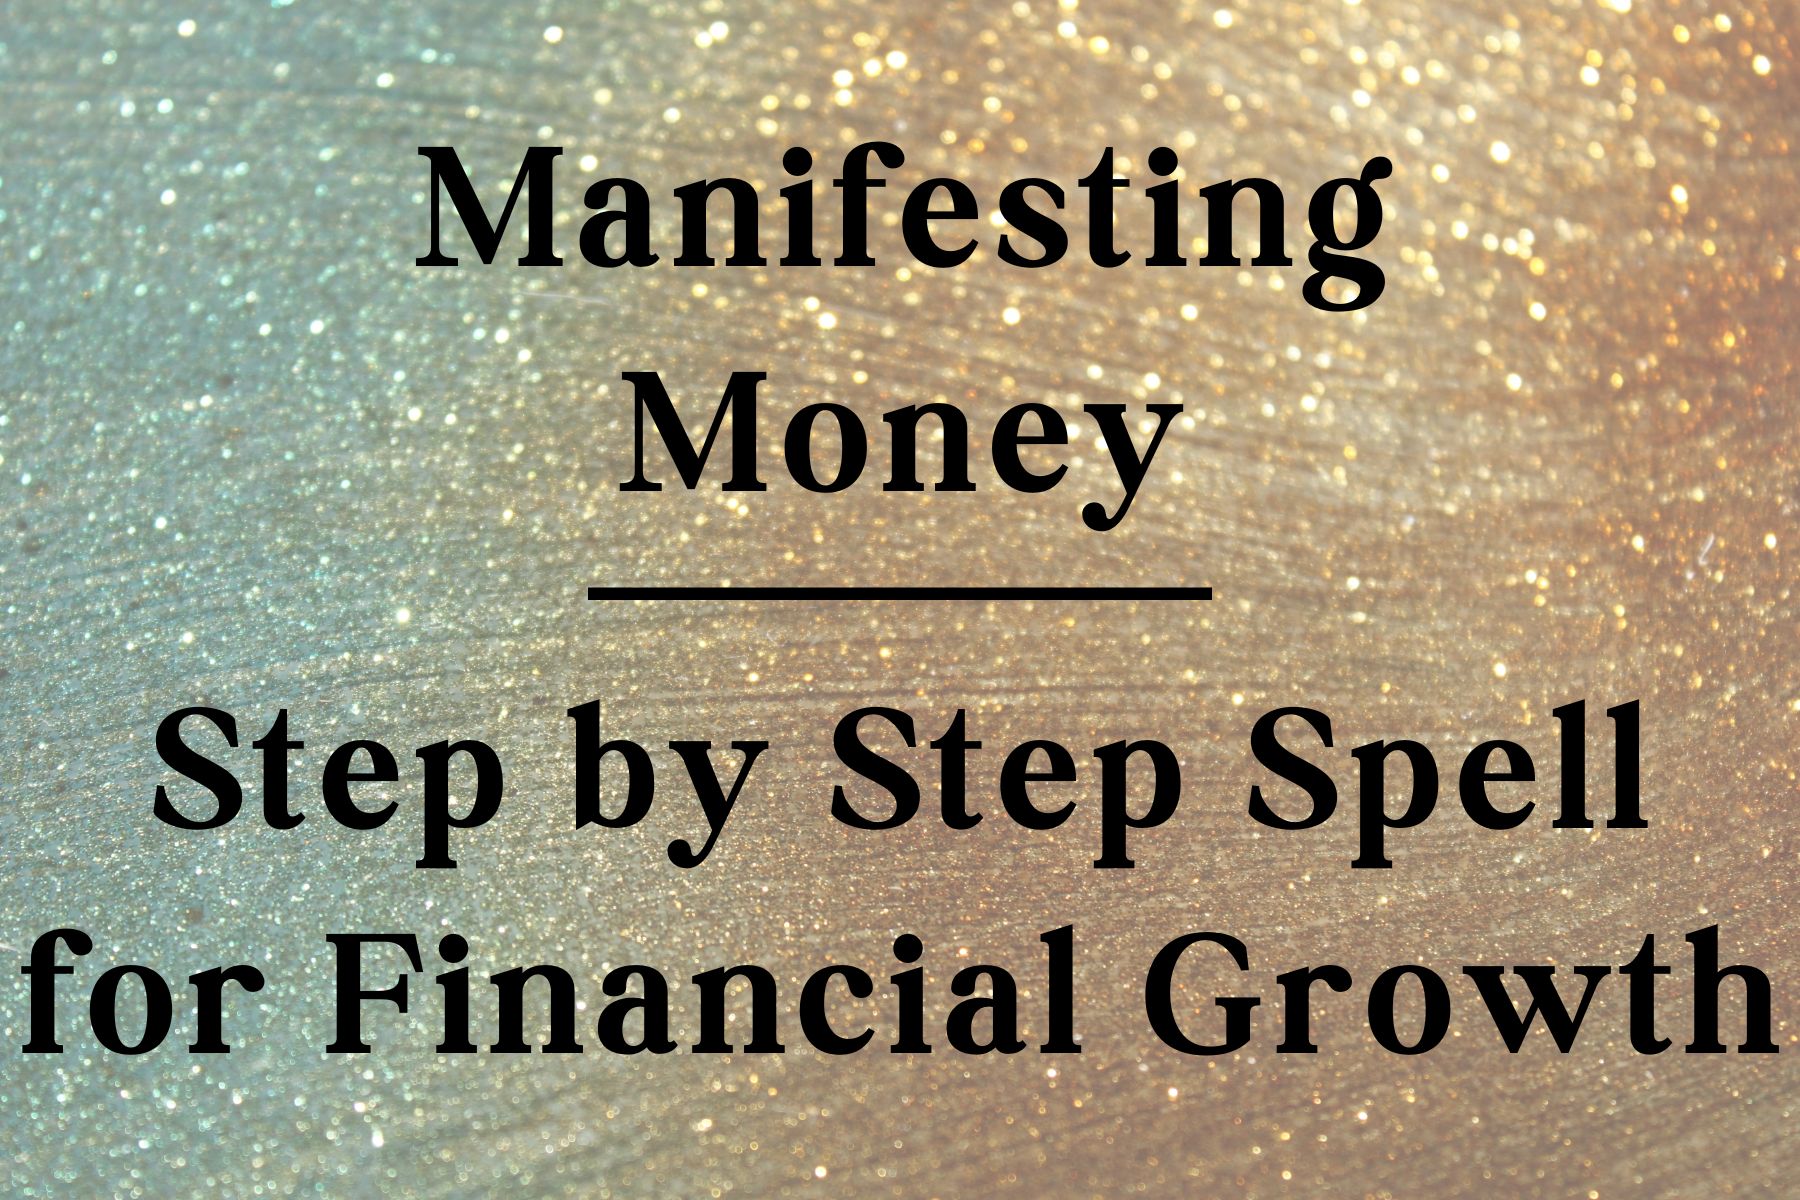 Manifesting Money: Step-by-Step Spell for Financial Growth